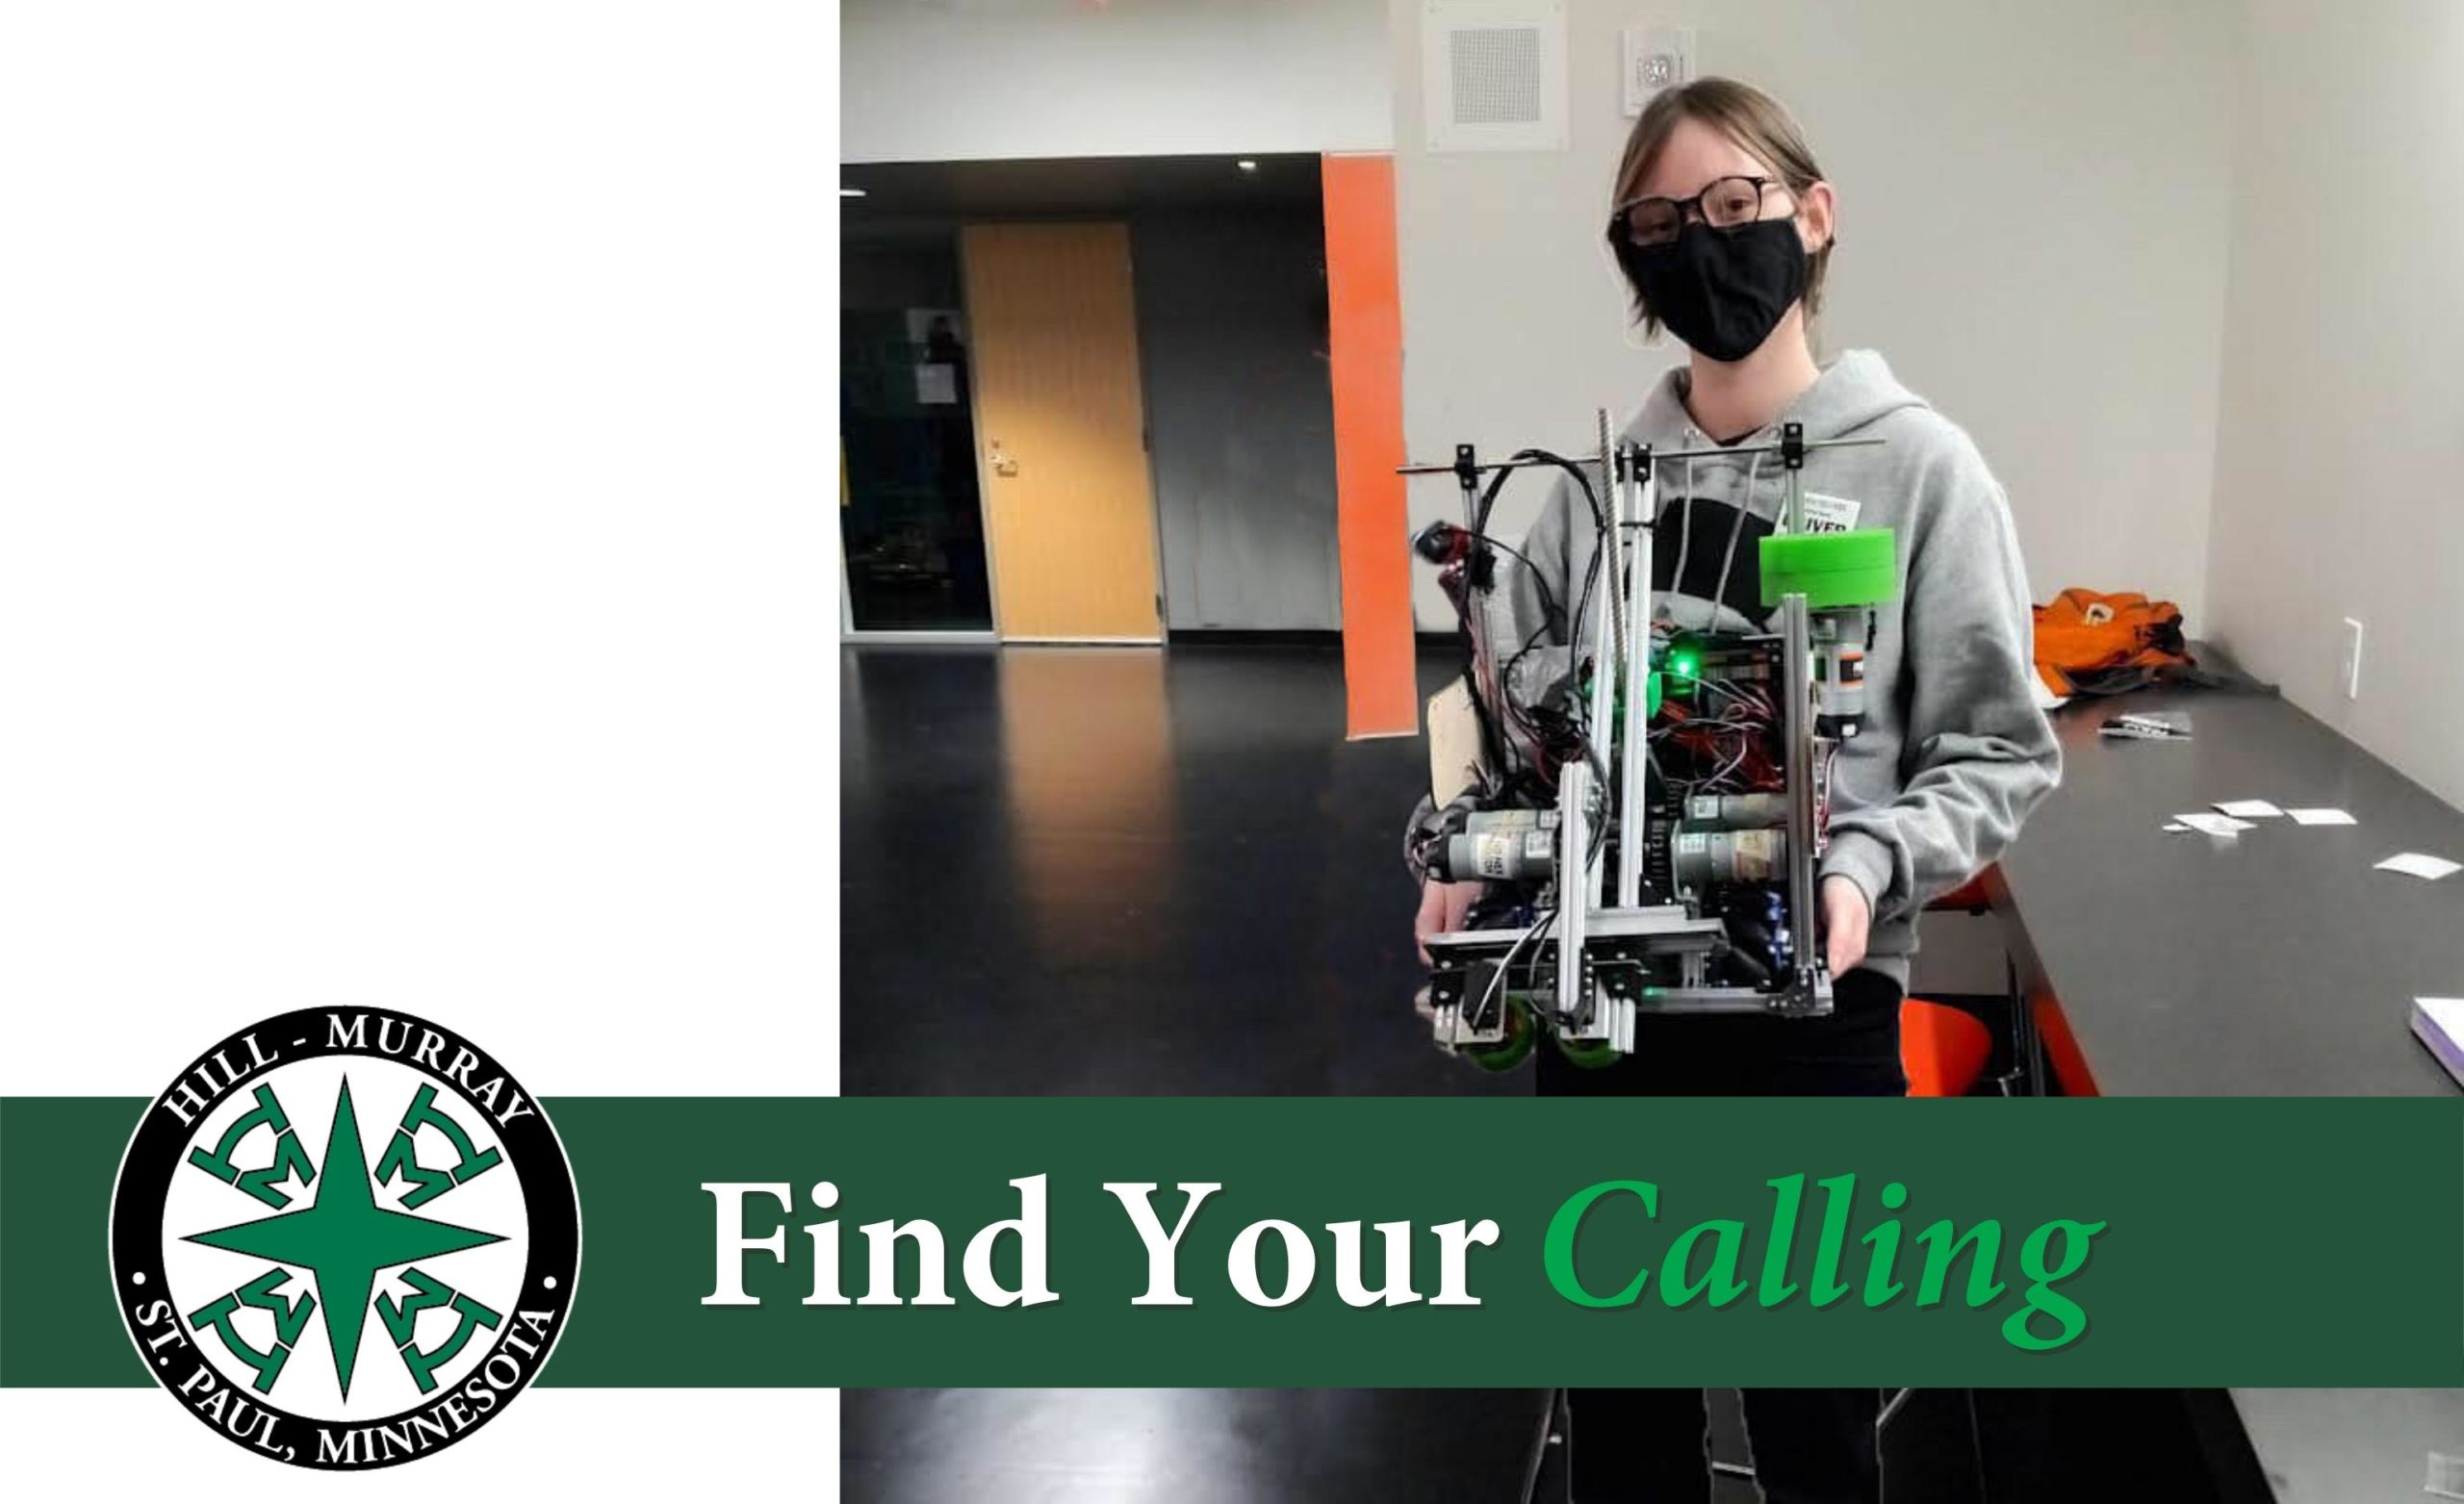 Find Your Calling: Olivia Munro discovers her passion in robotics and the sciences